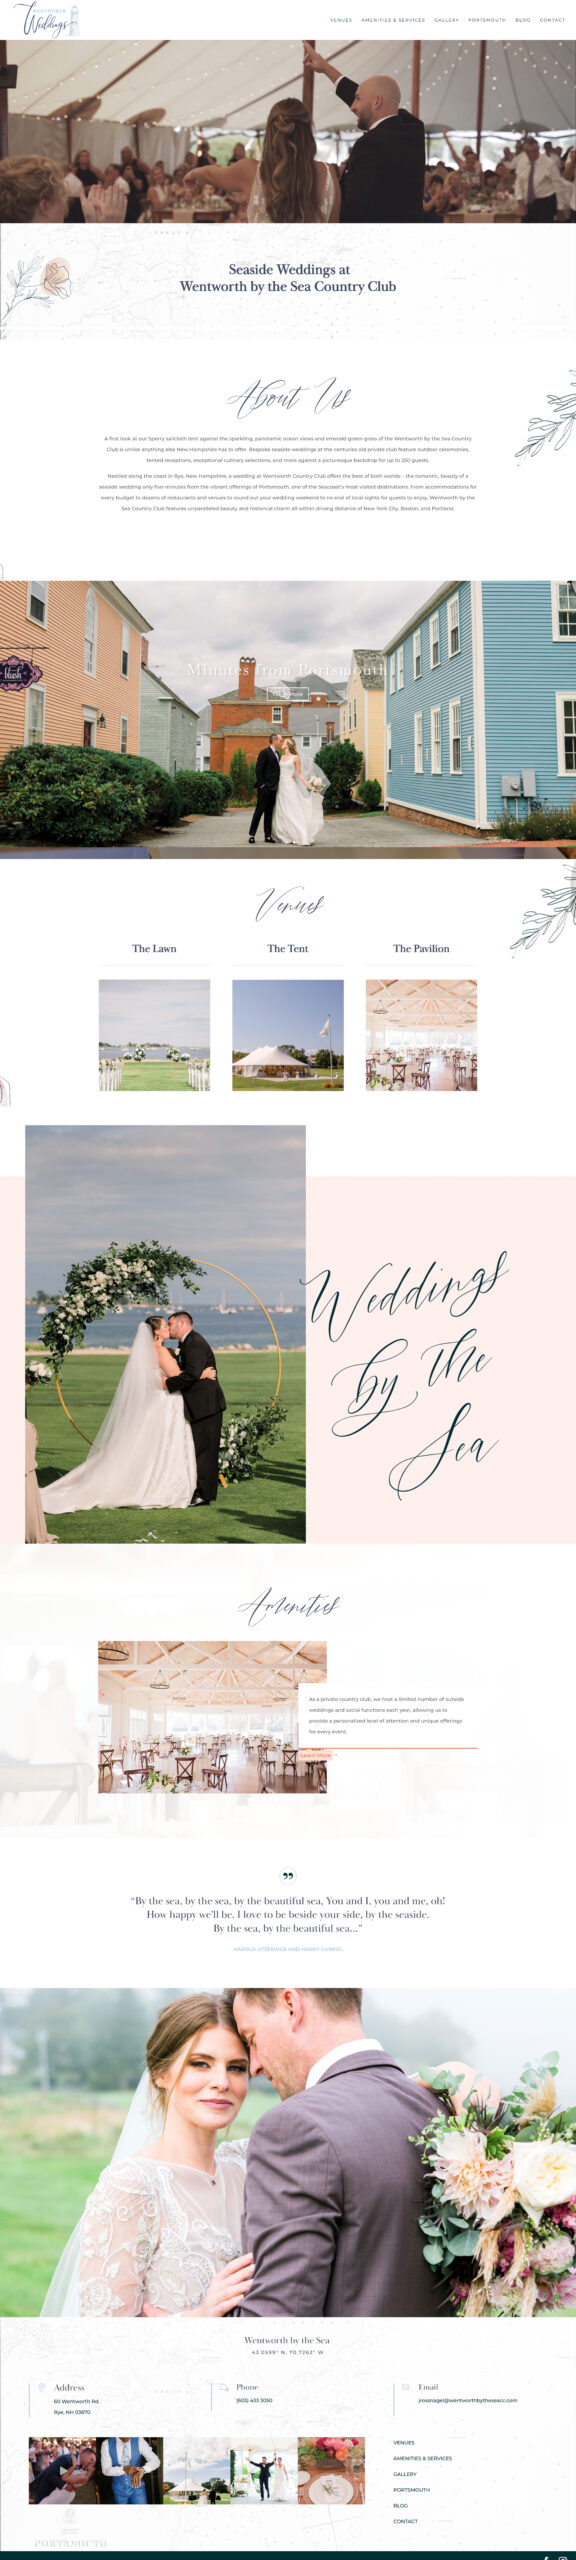 Wentworth Weddings home page